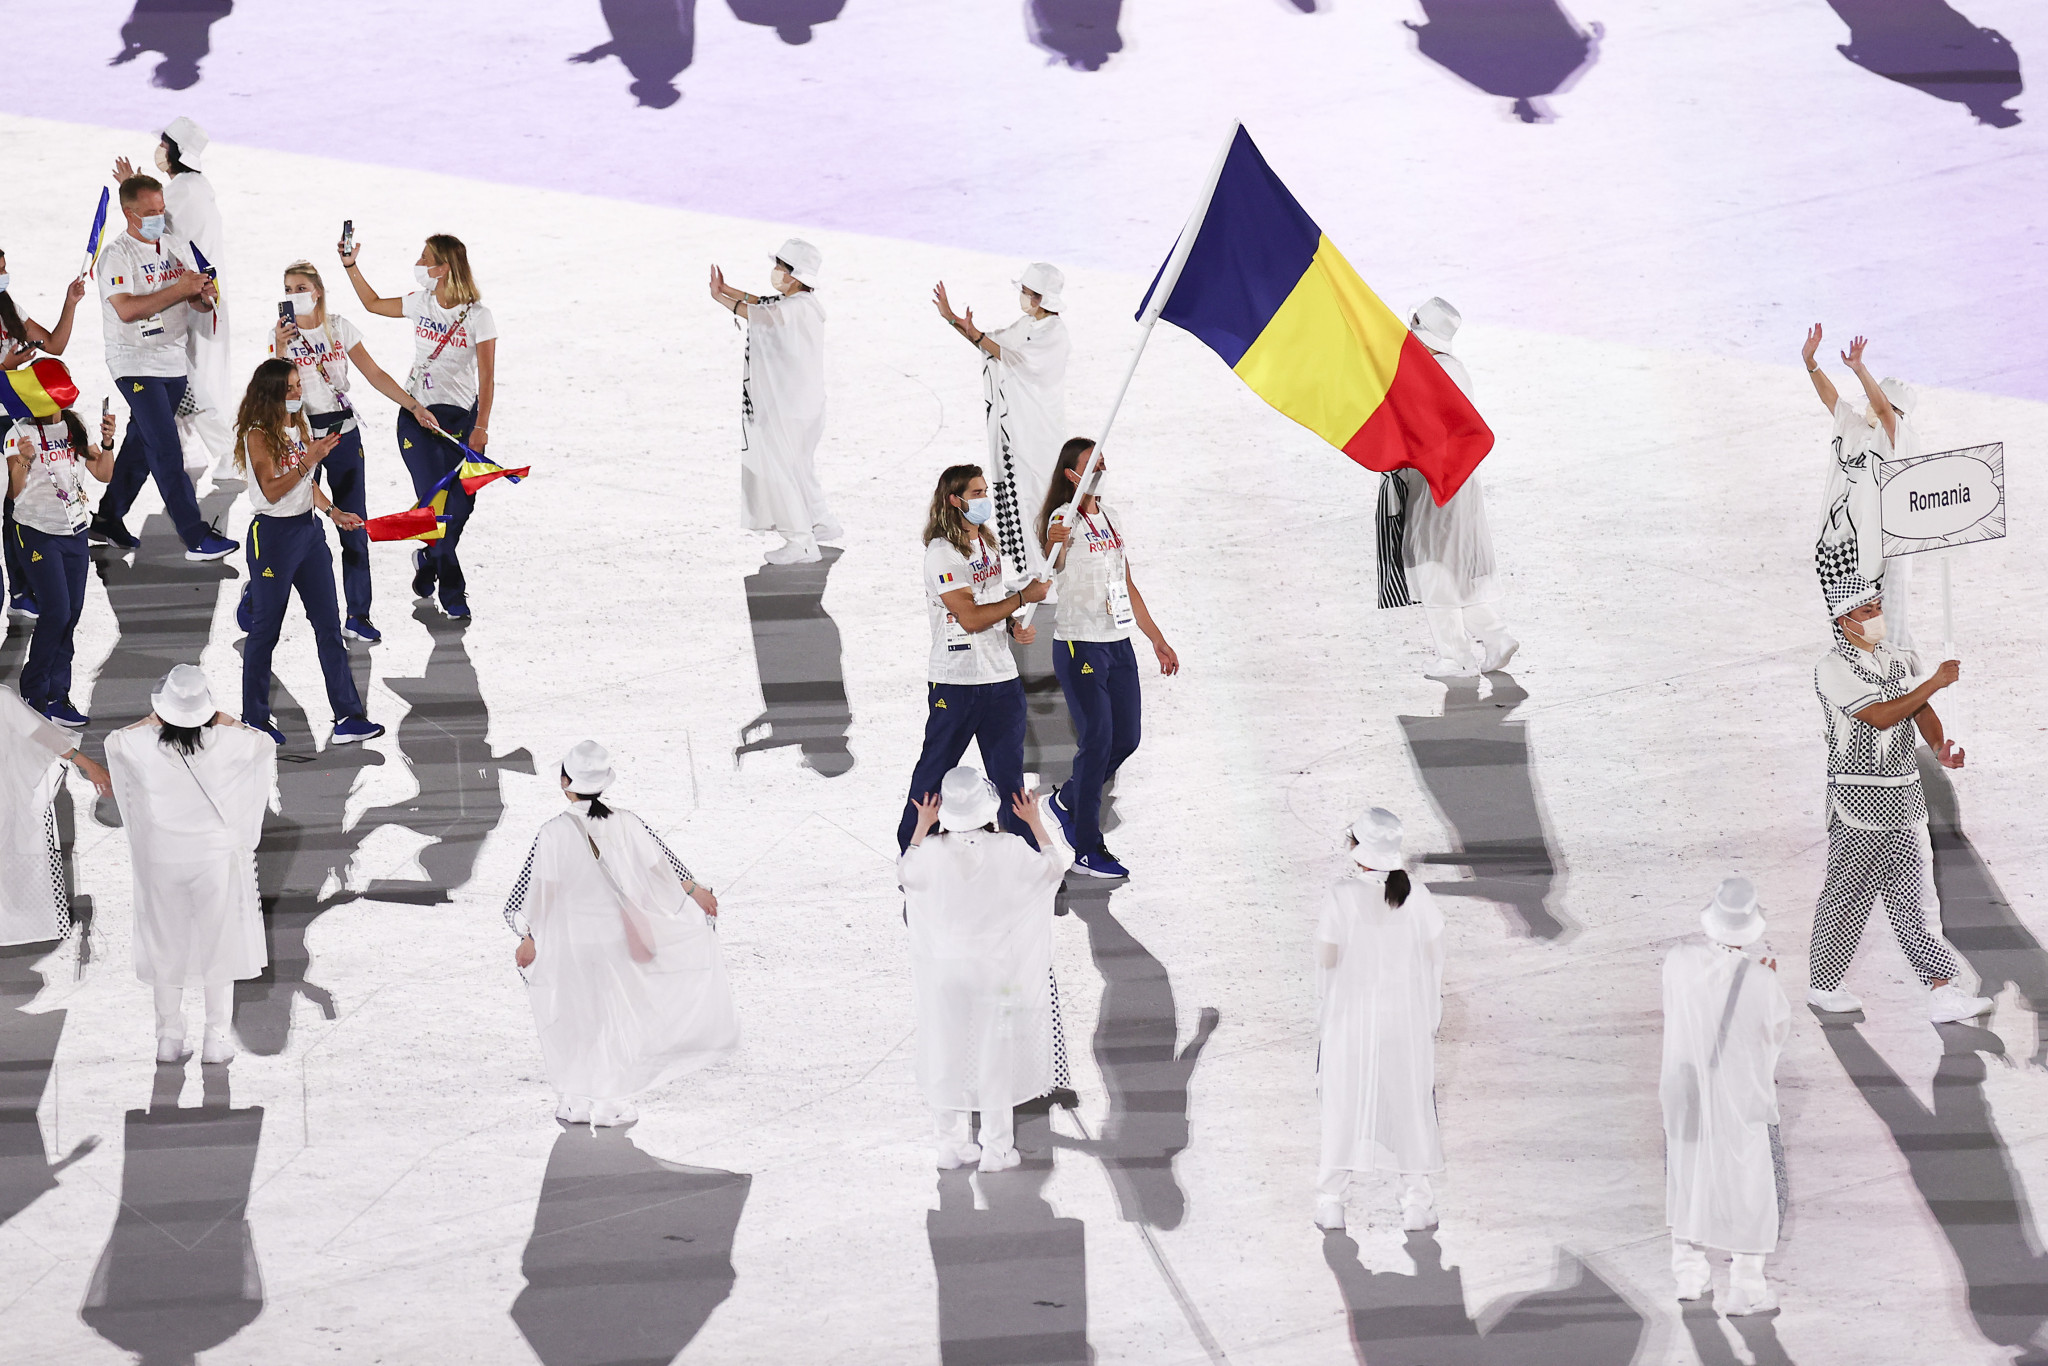 Romanian national bodies set goal of 16 medals for Paris 2024 Olympics